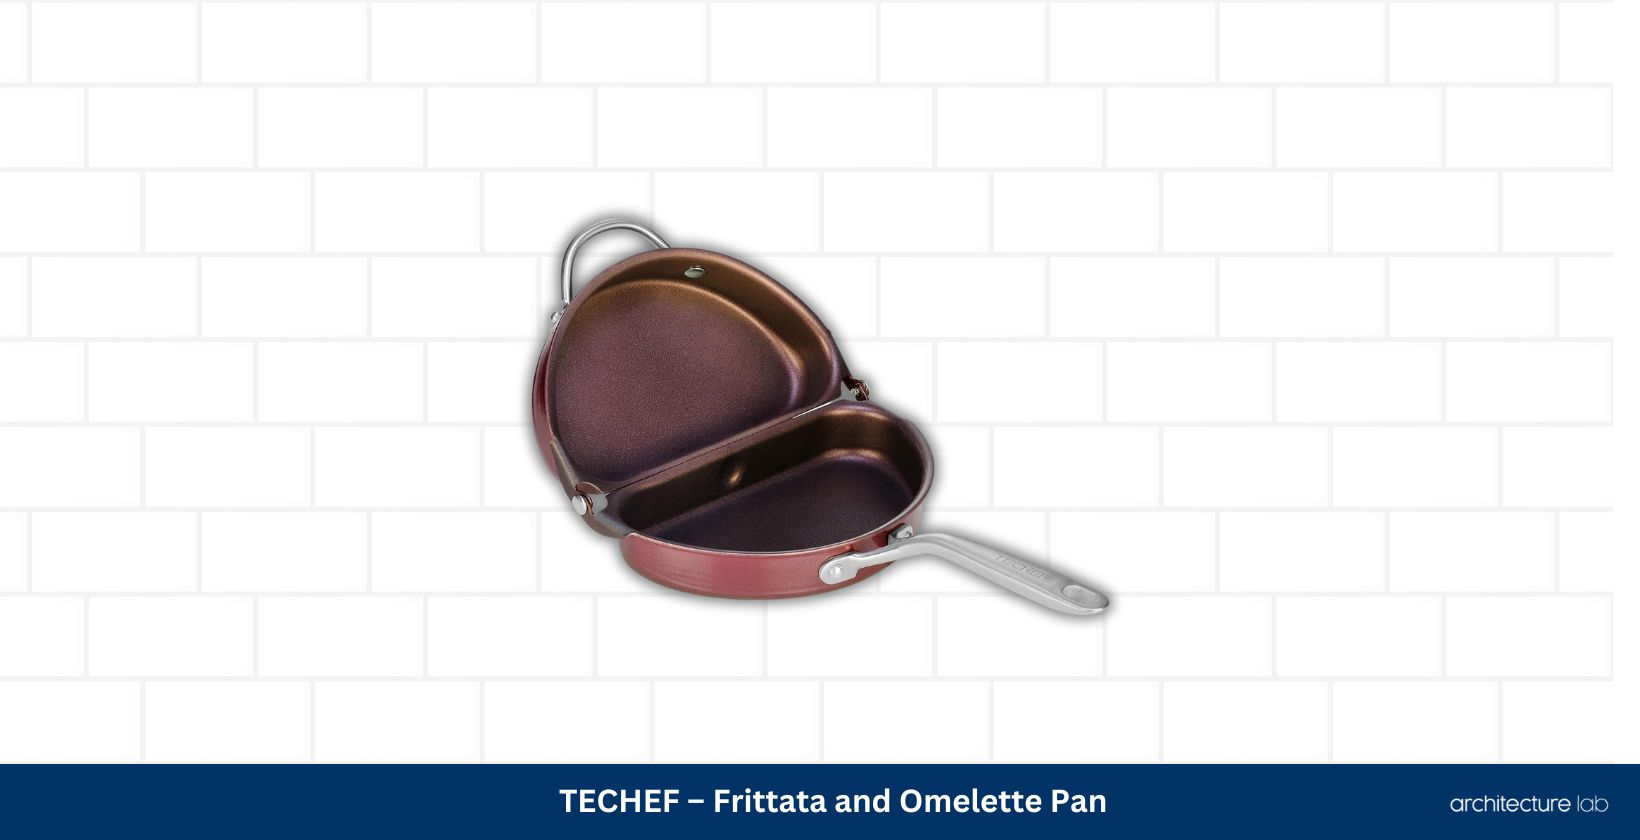 Techef – frittata and omelette pan